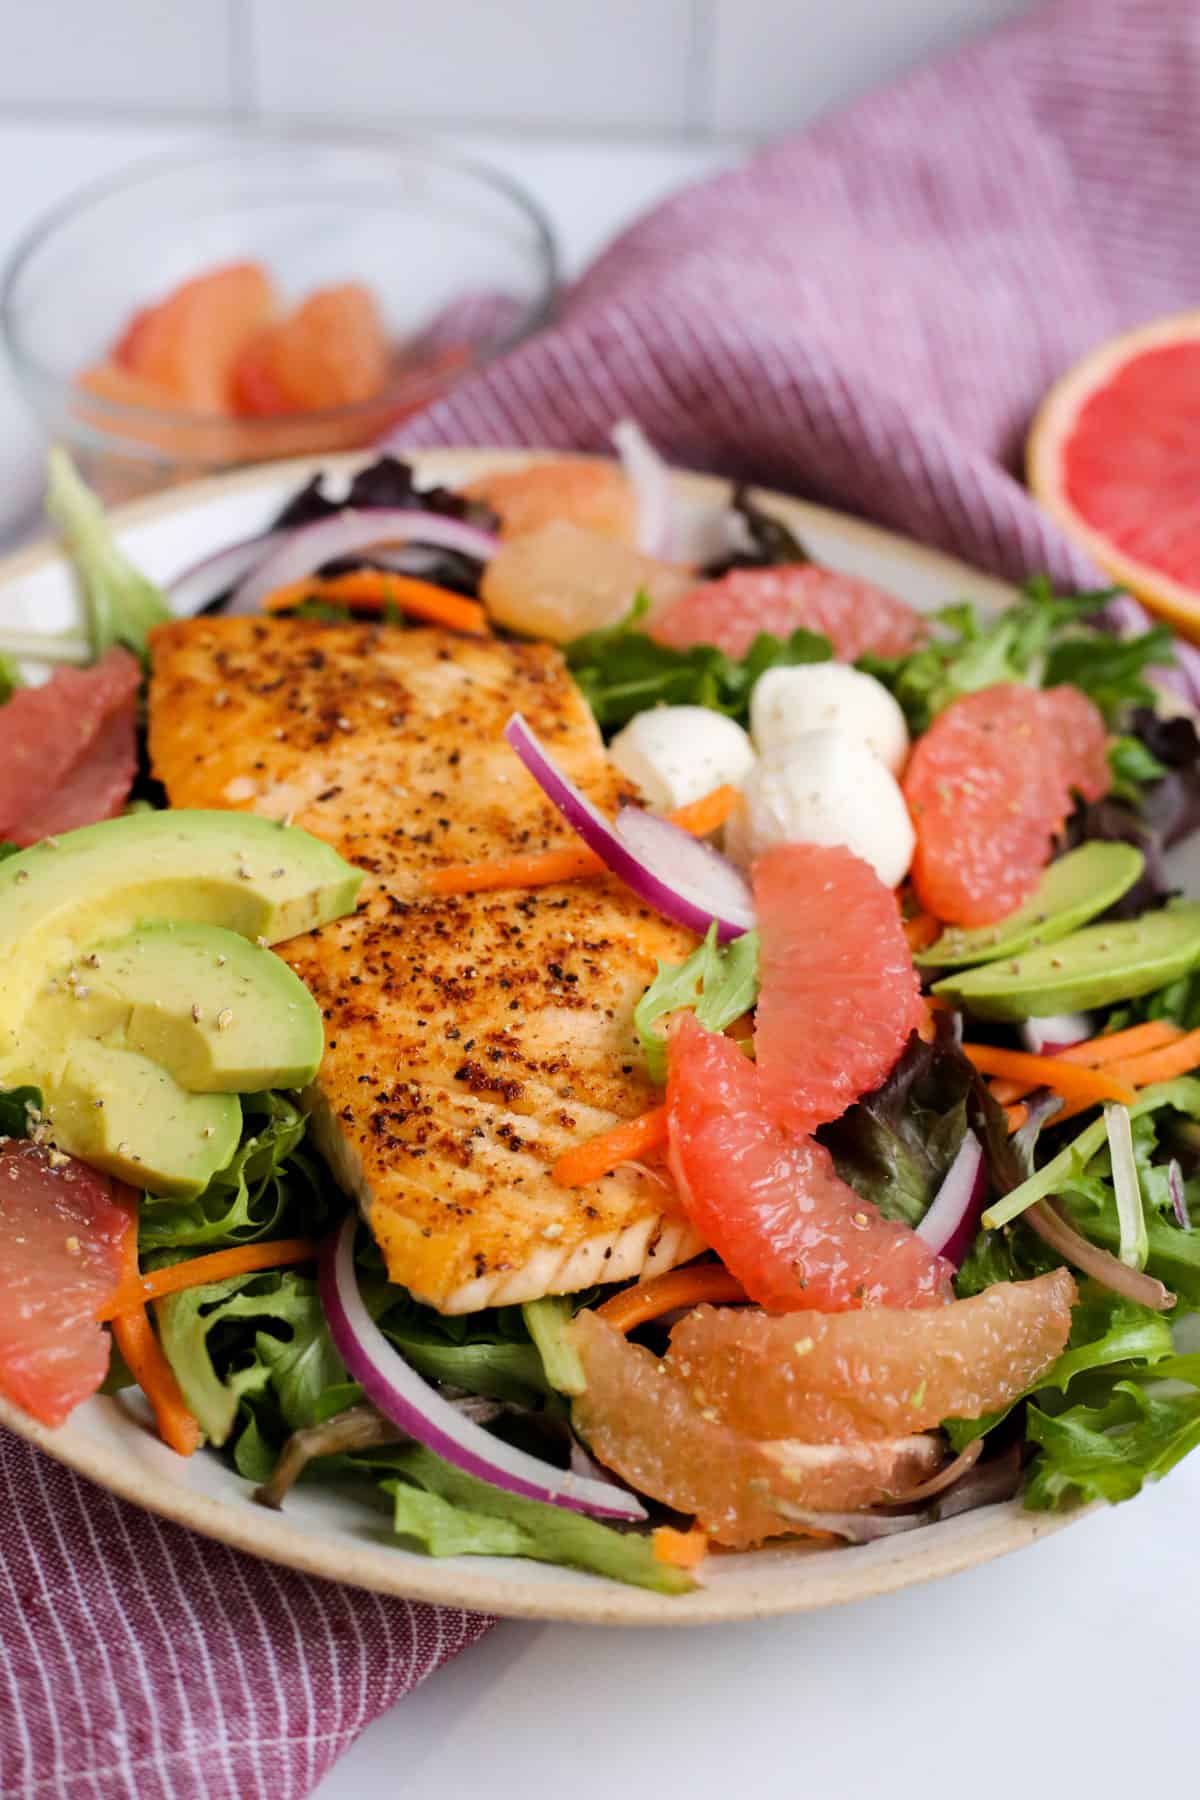 A colorful salad served on a ceramic dish, featuring seared salmon, grapefruit wedges avocados, and other ingredients that complement grapefruit nutrition and flavor